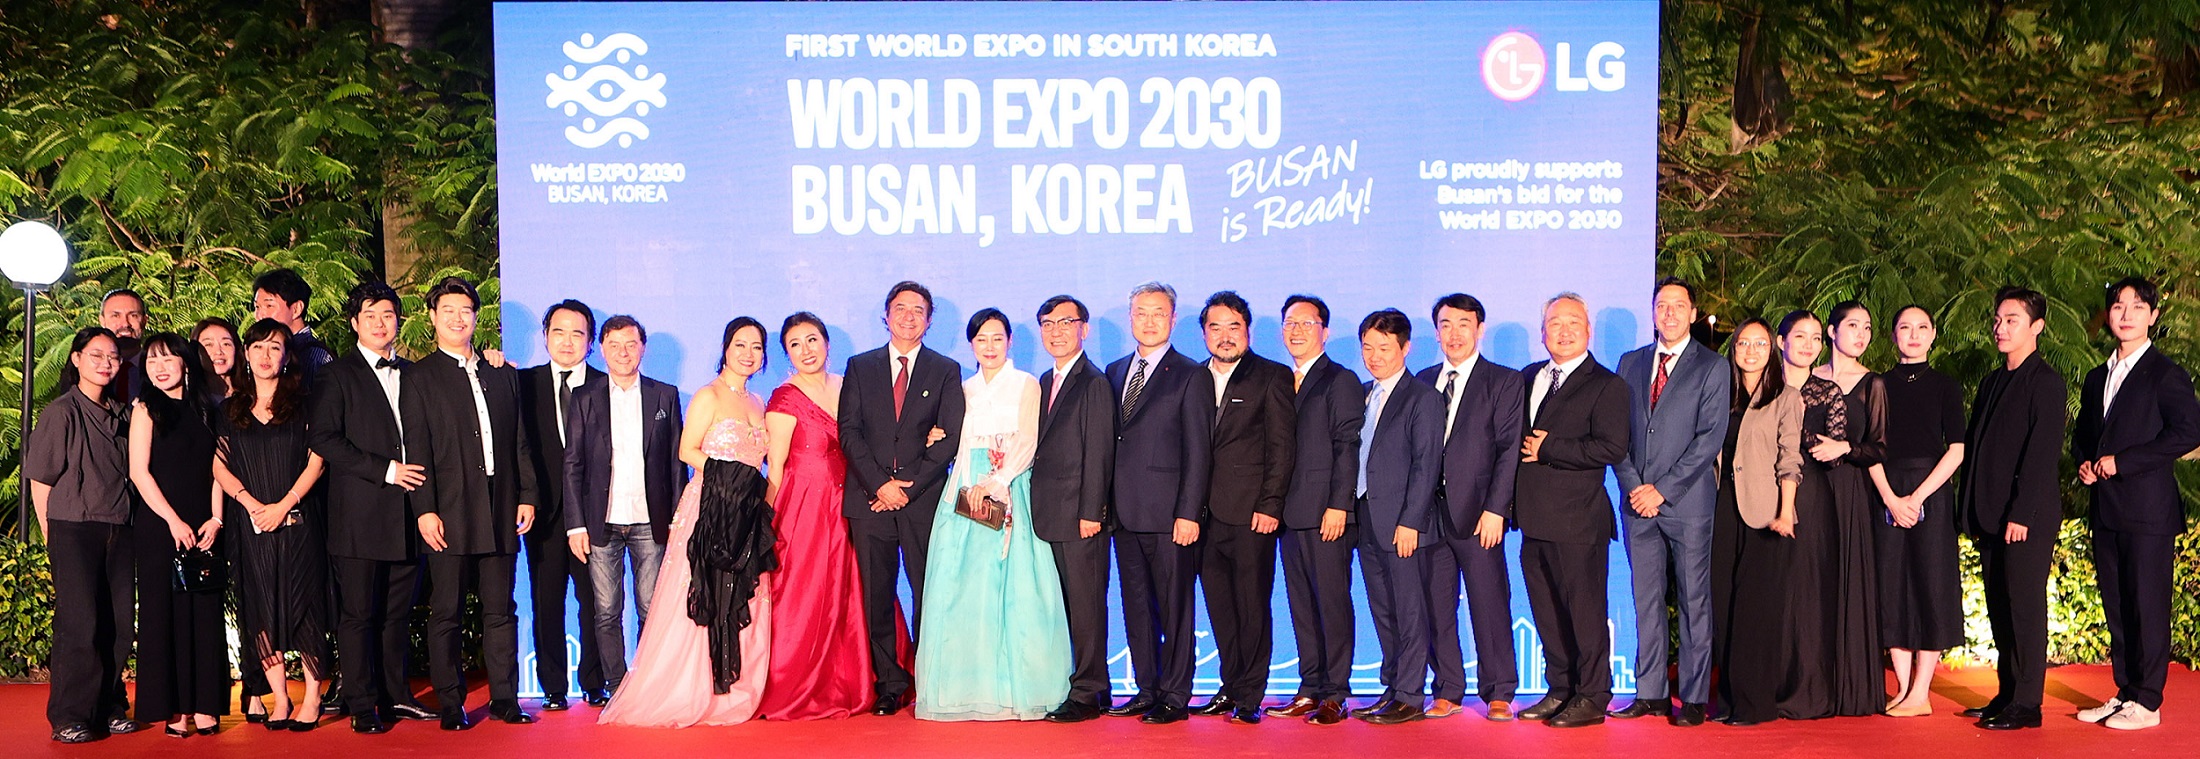 A photo of opera-related actors and staff posing on the podium with a digital screen at the back displaying the phrase "WORLD EXPO 2030 BUSAN, KOREA"